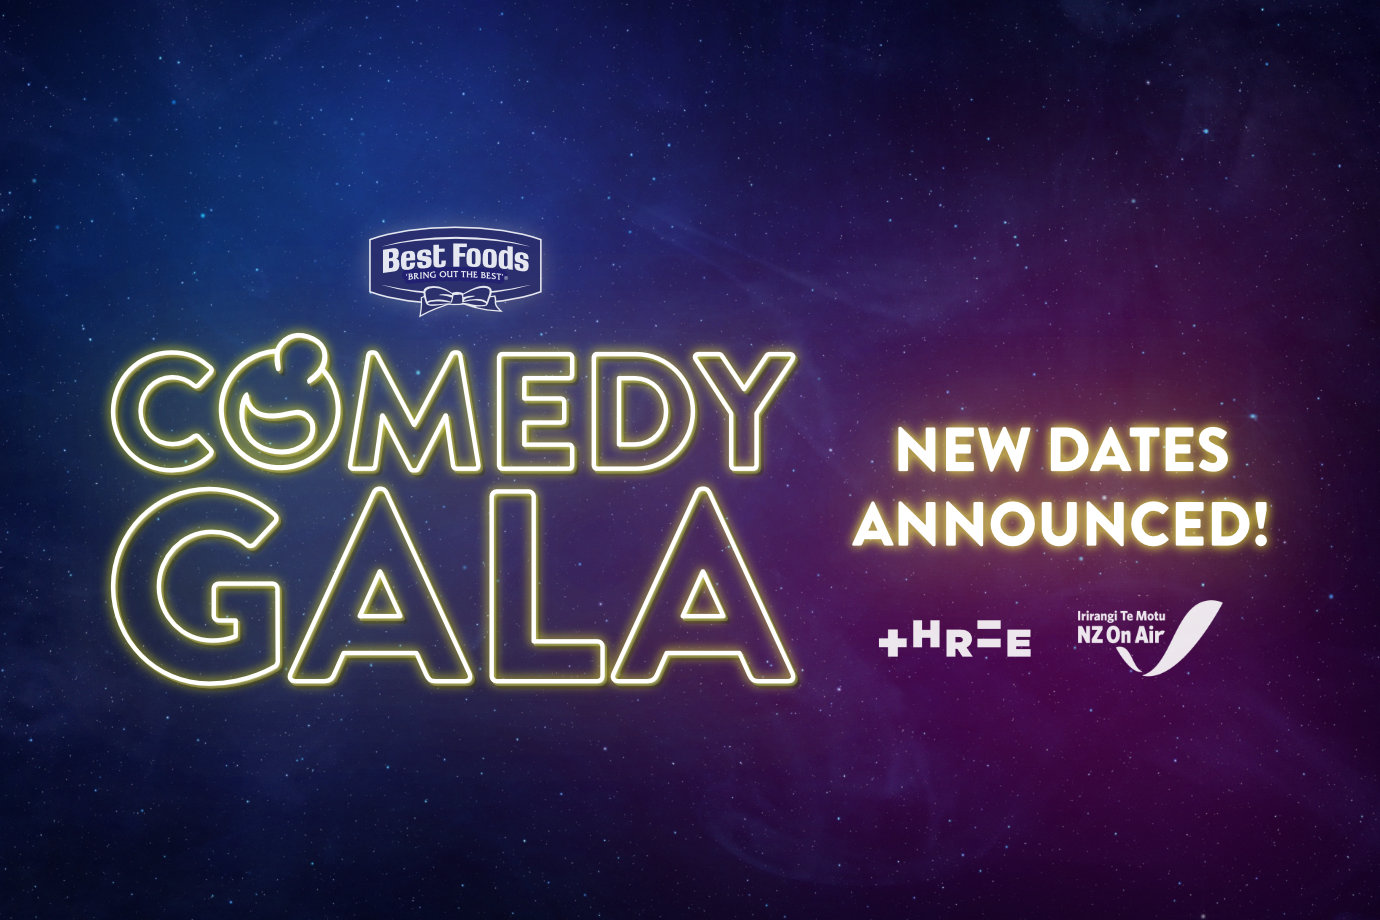 Comedy is making a comeback – new dates announced for Best Foods Comedy Galas!